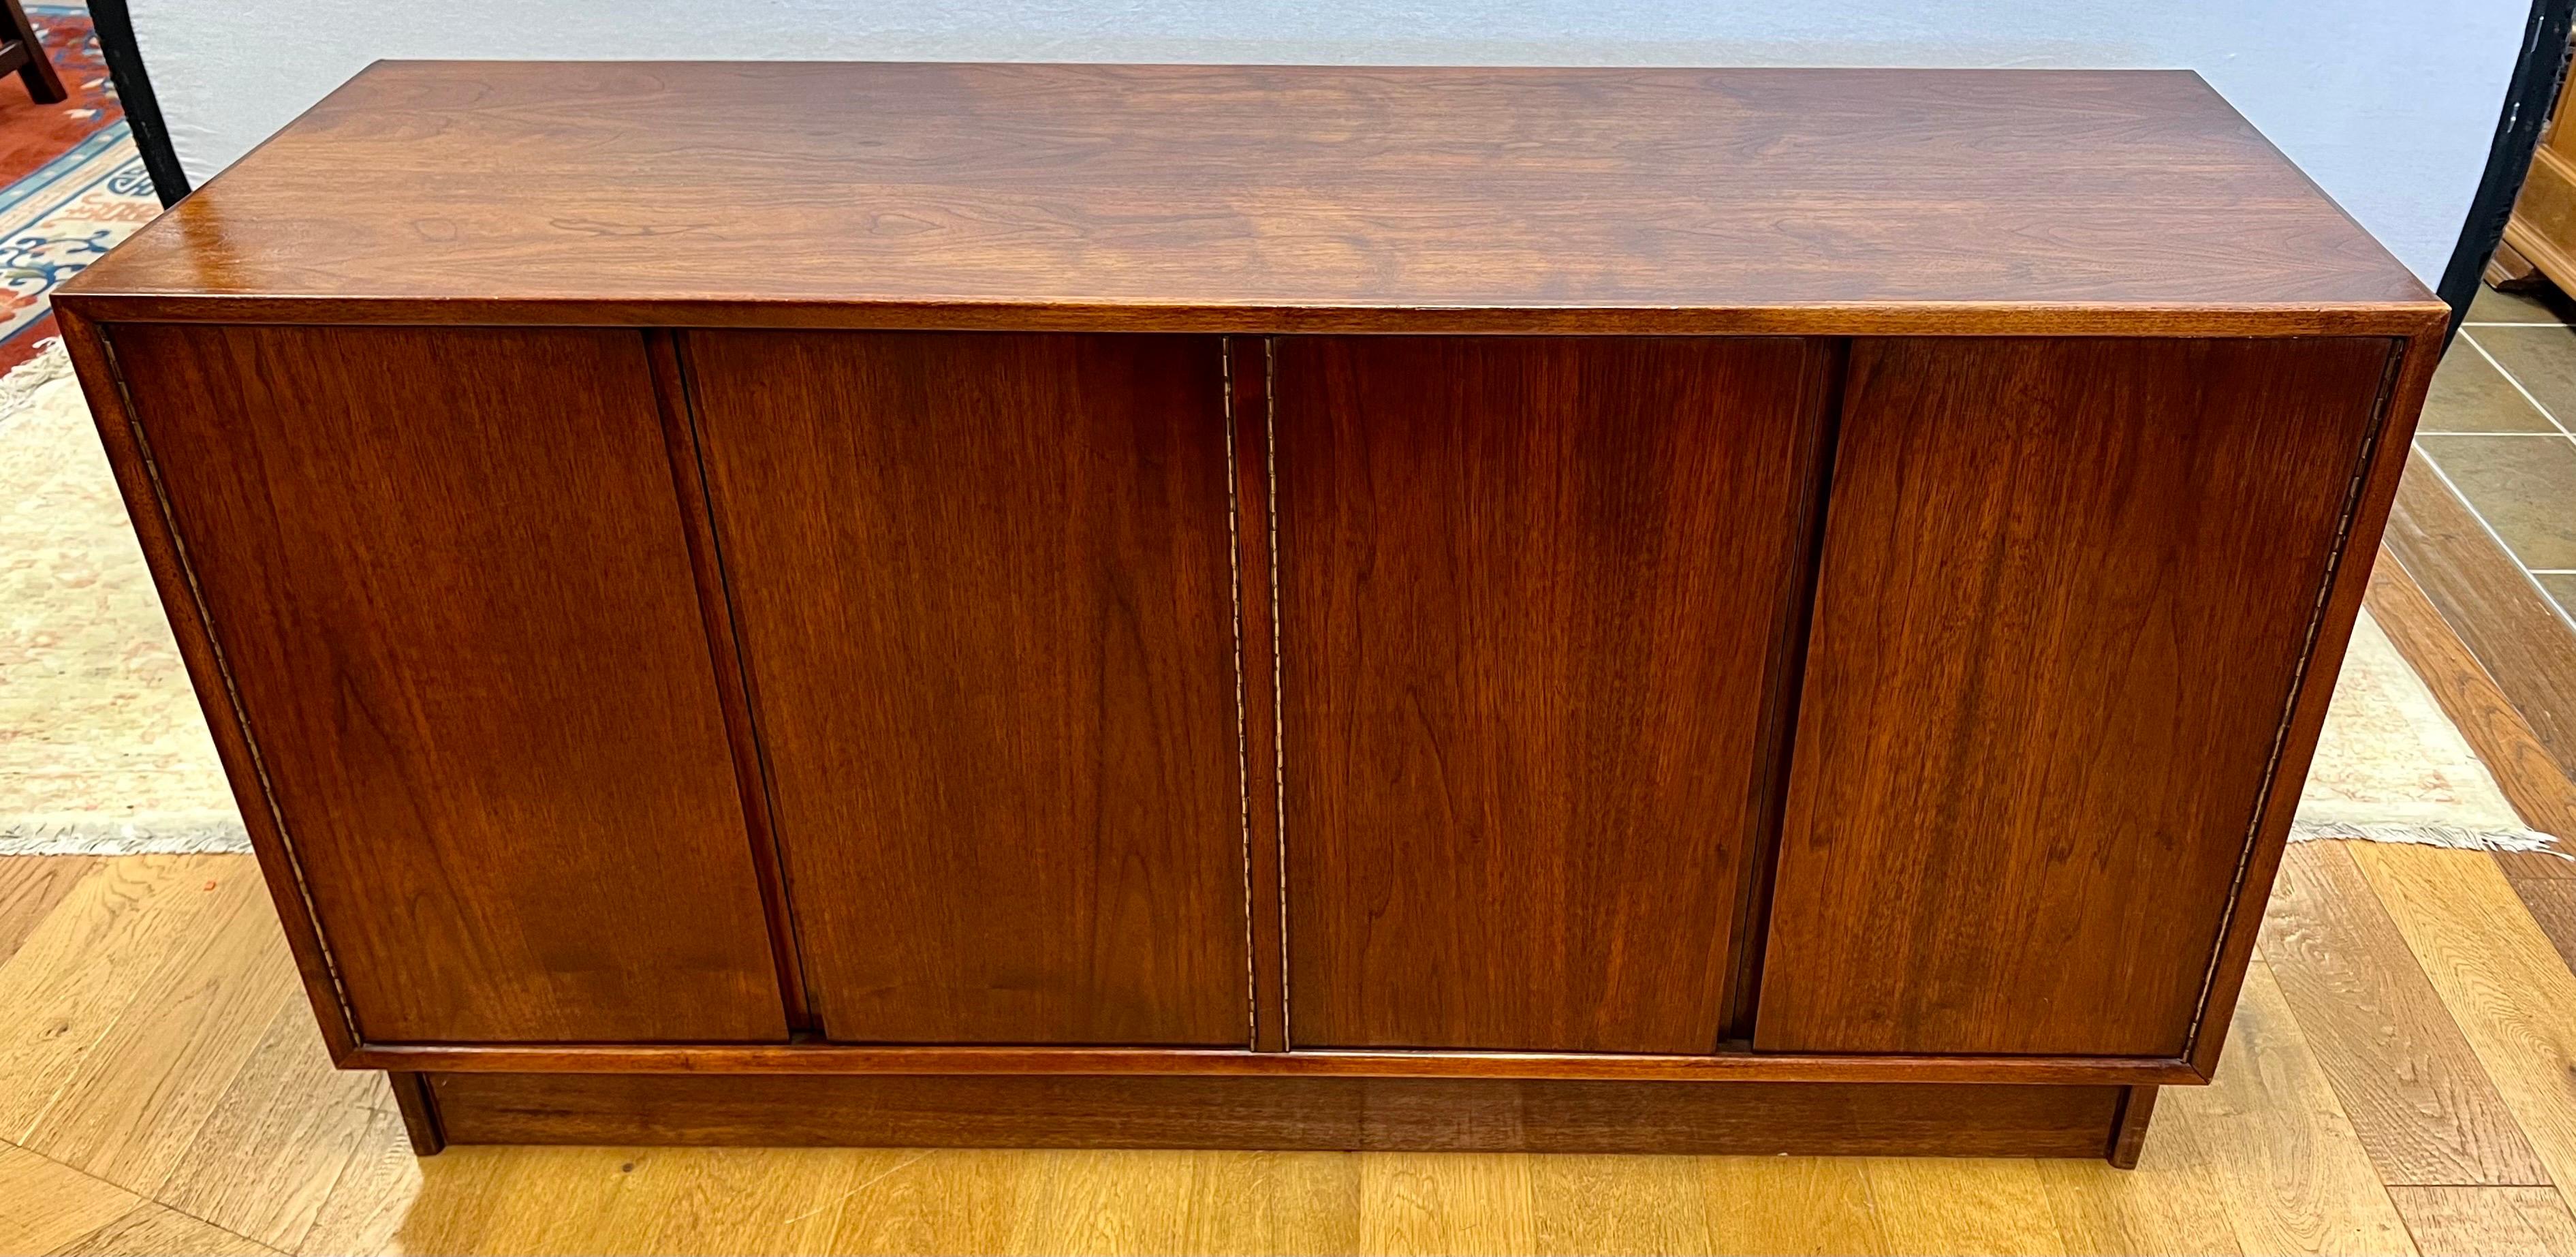 Vintage mid century walnut credenza features four doors that open to plenty of storage. Cabinet has been polished to bring out the beautiful wood graining. Great scale and better lines. Why not own the good stuff. Made in USA by Foster-McDavid,